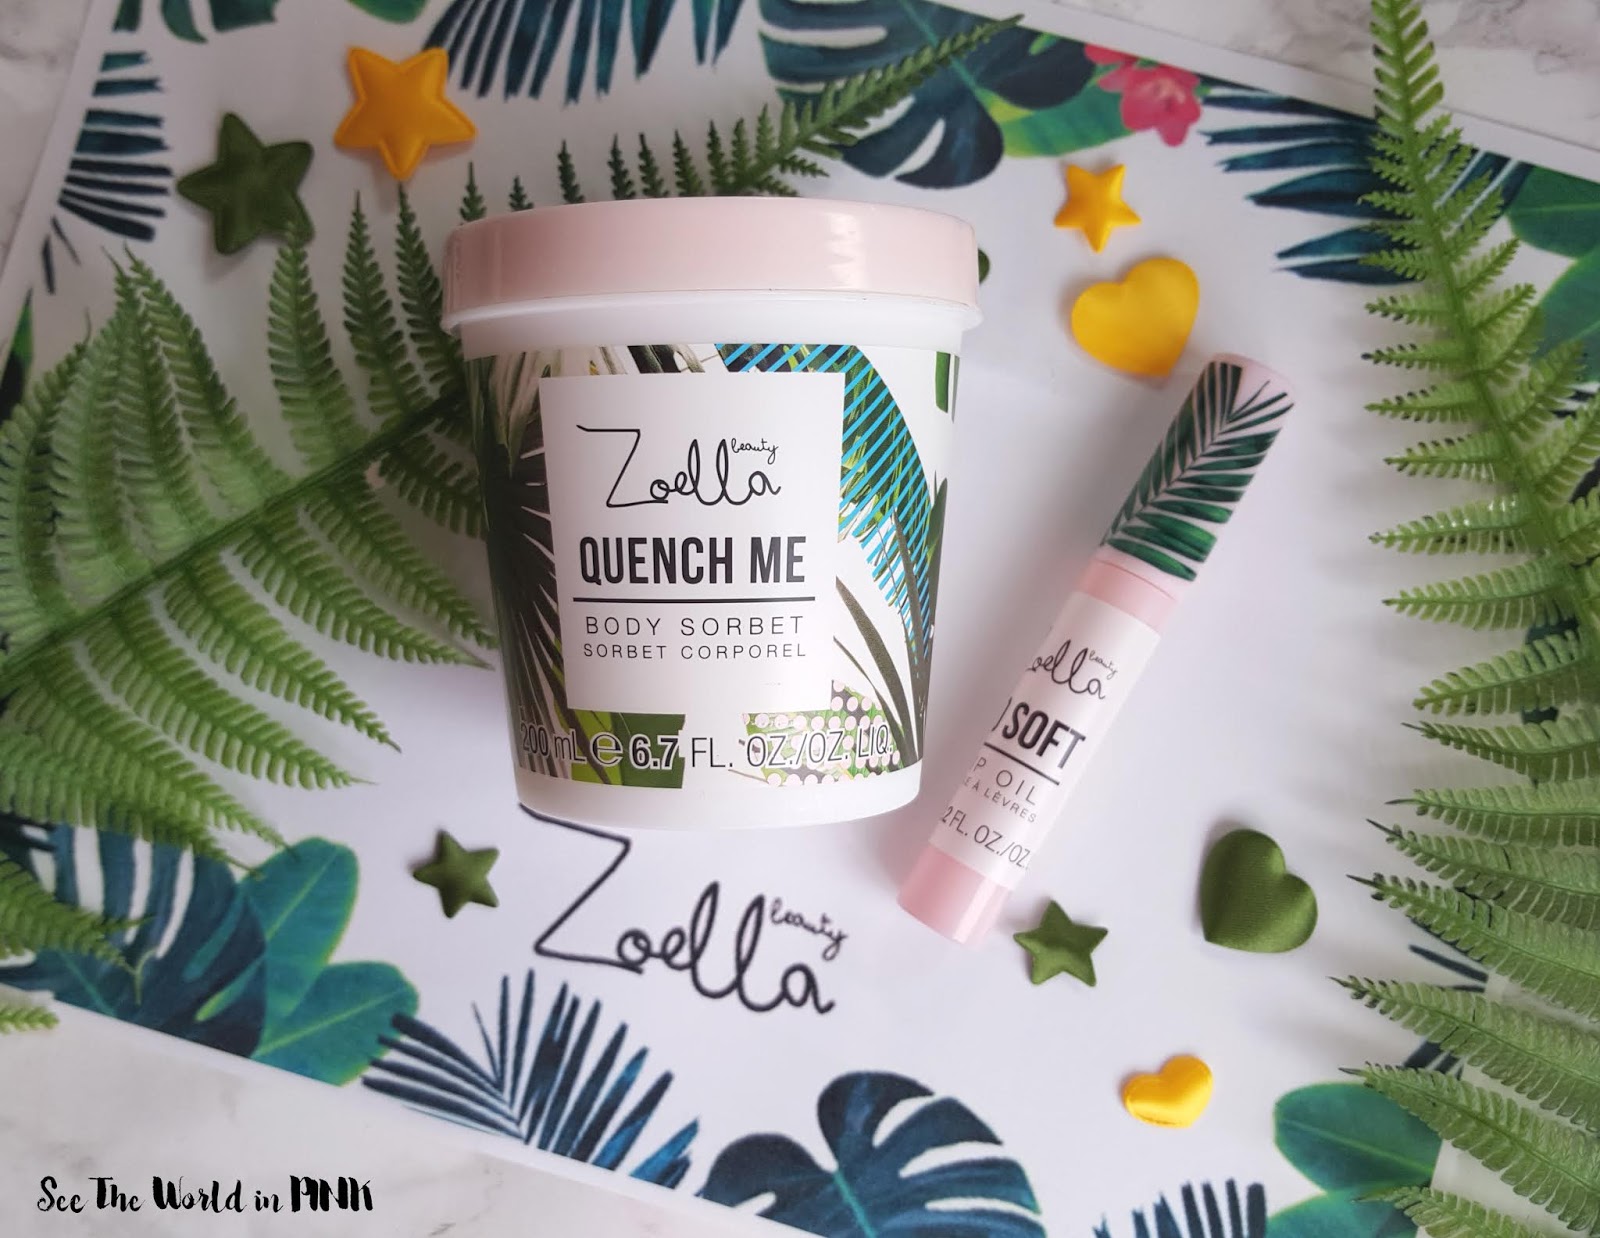 Skincare Sunday - Zoella Beauty Lip Oil & Body Sorbert Review & Giveaway!  